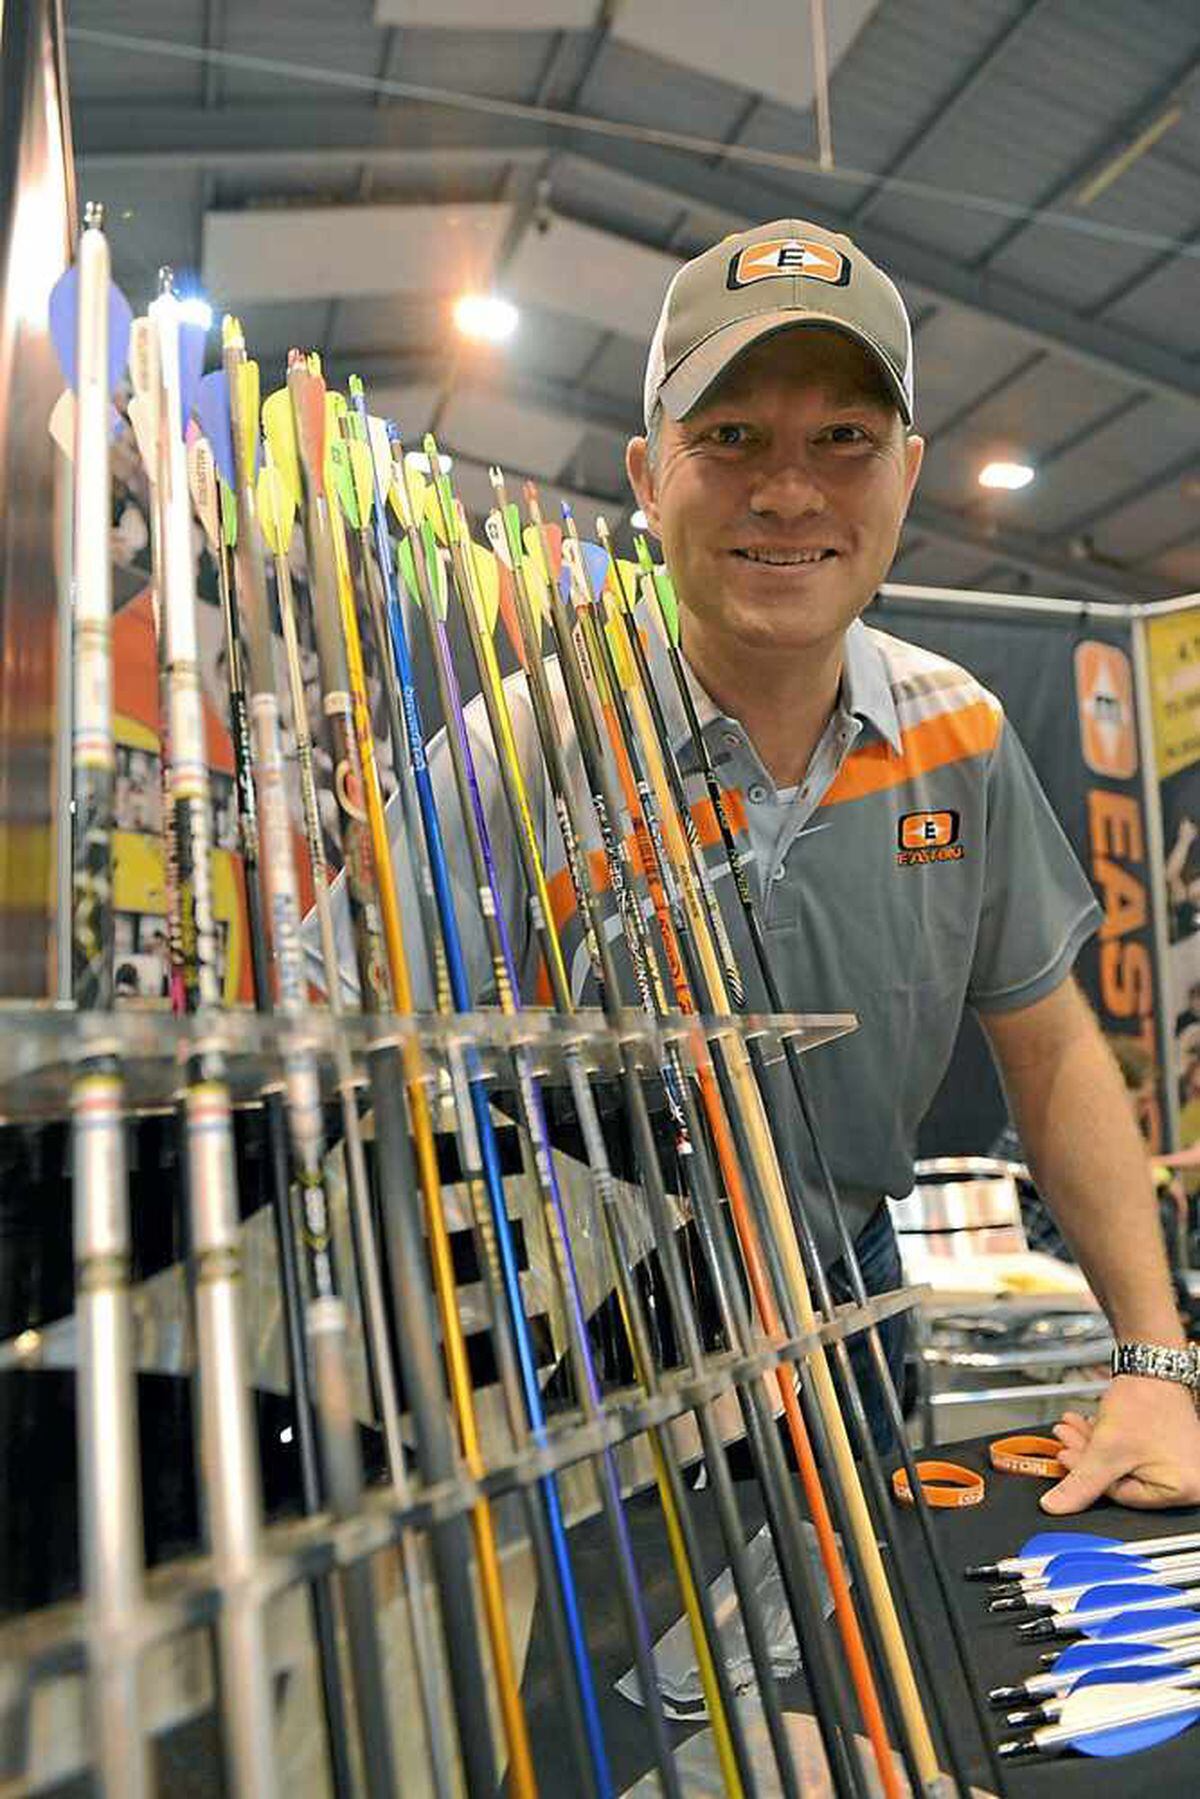 Logan Wilde, from archery firm Easton, with a display of arrows